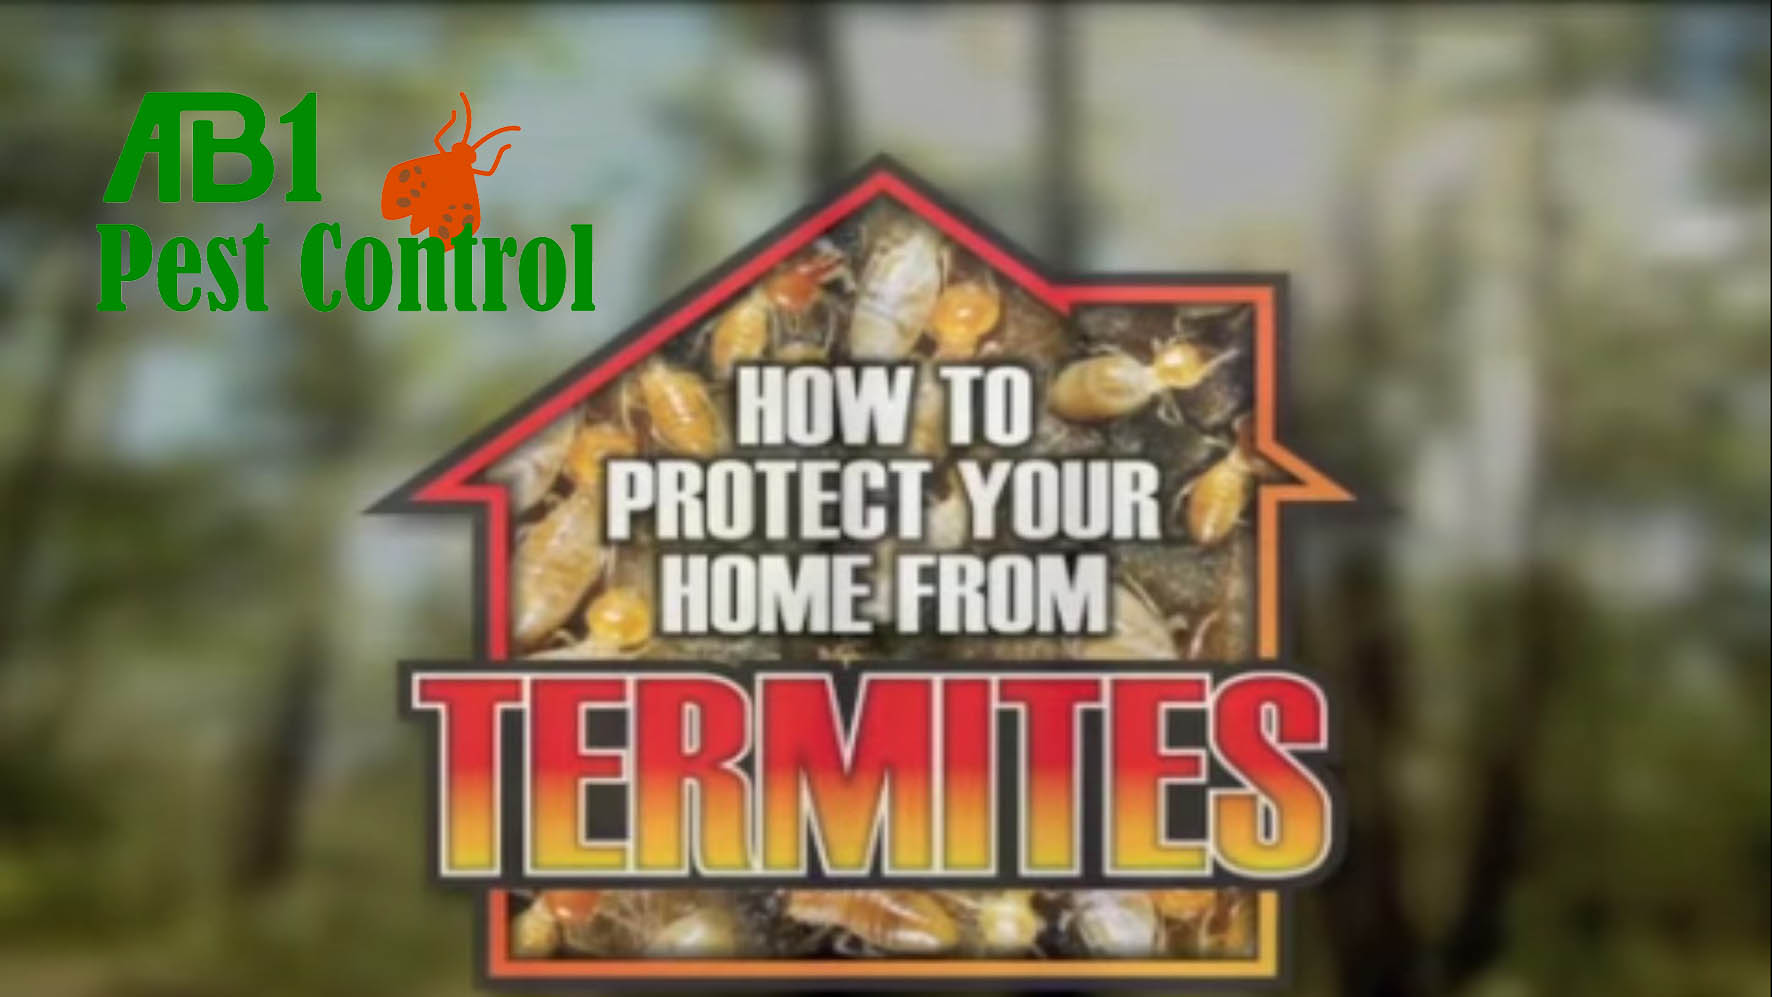 Termite protection for your home